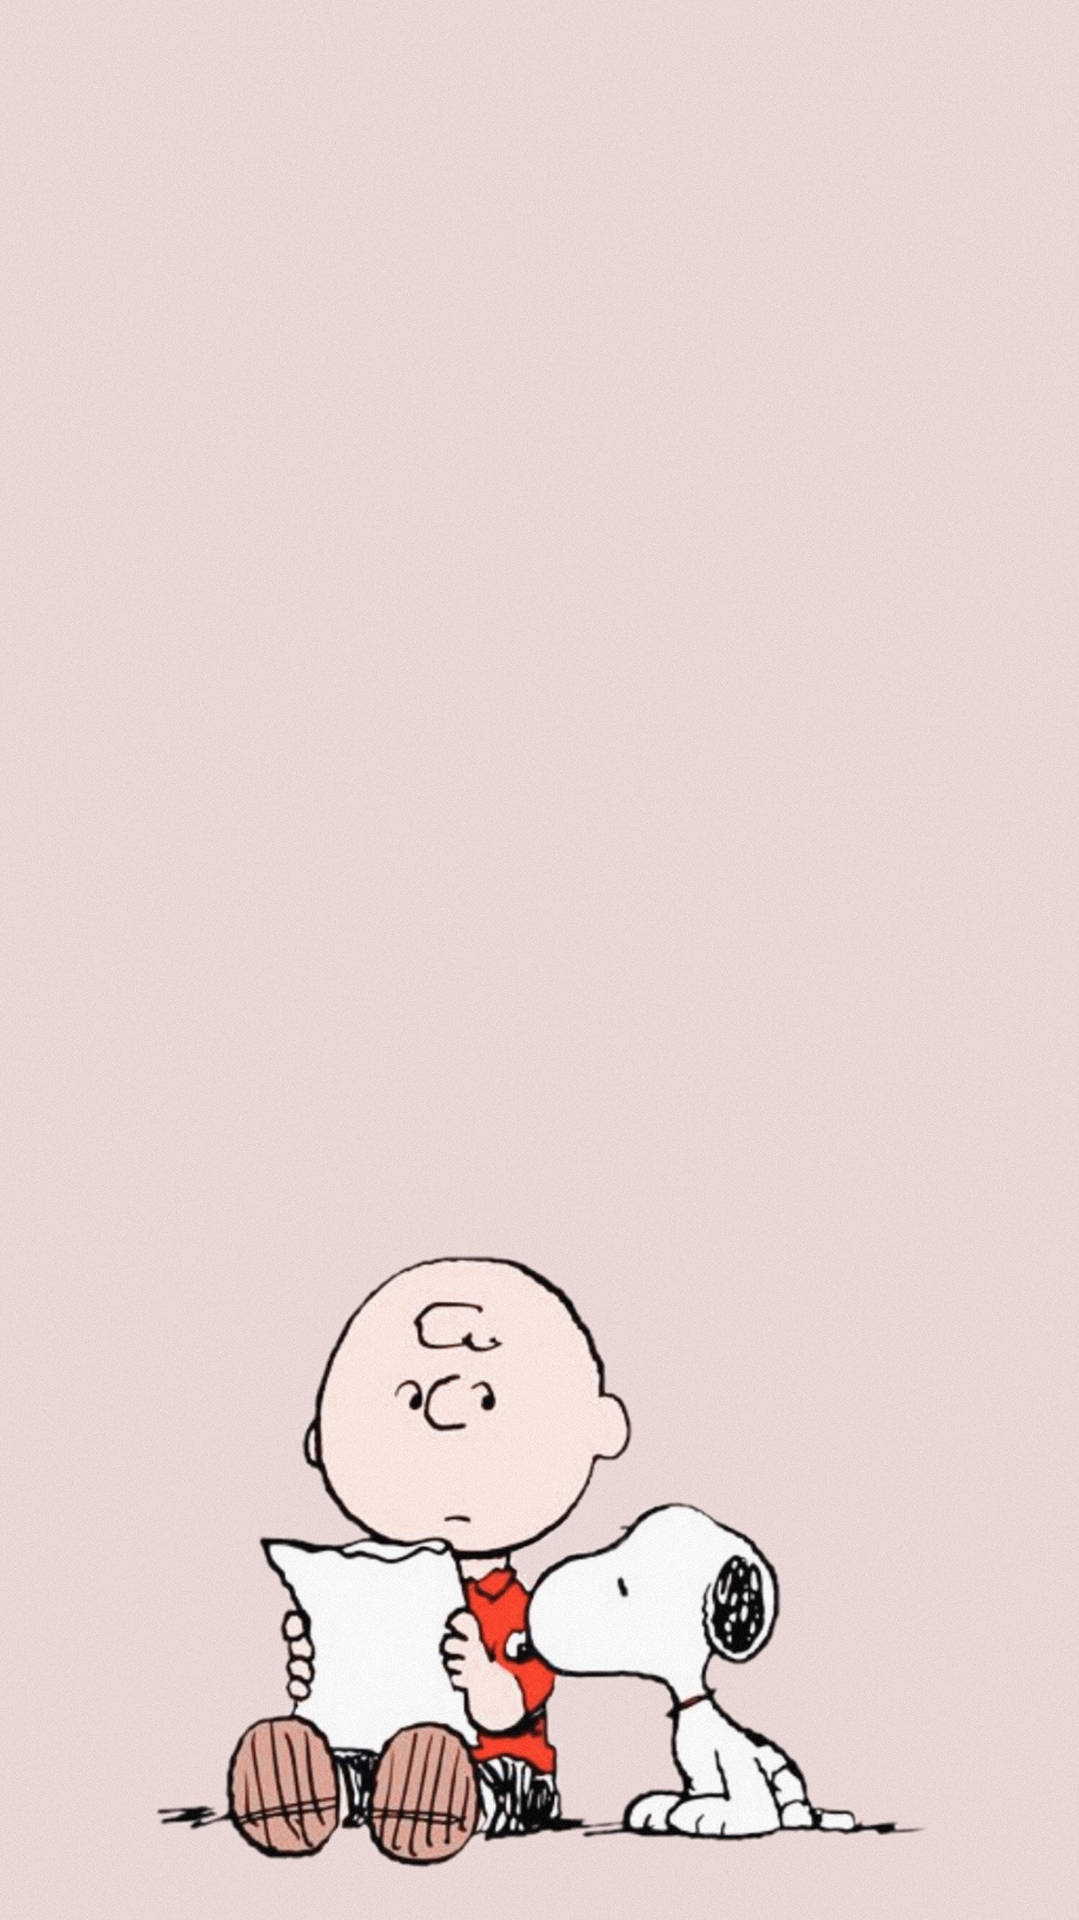 Free Charlie Brown Wallpaper Downloads, Charlie Brown Wallpaper for FREE